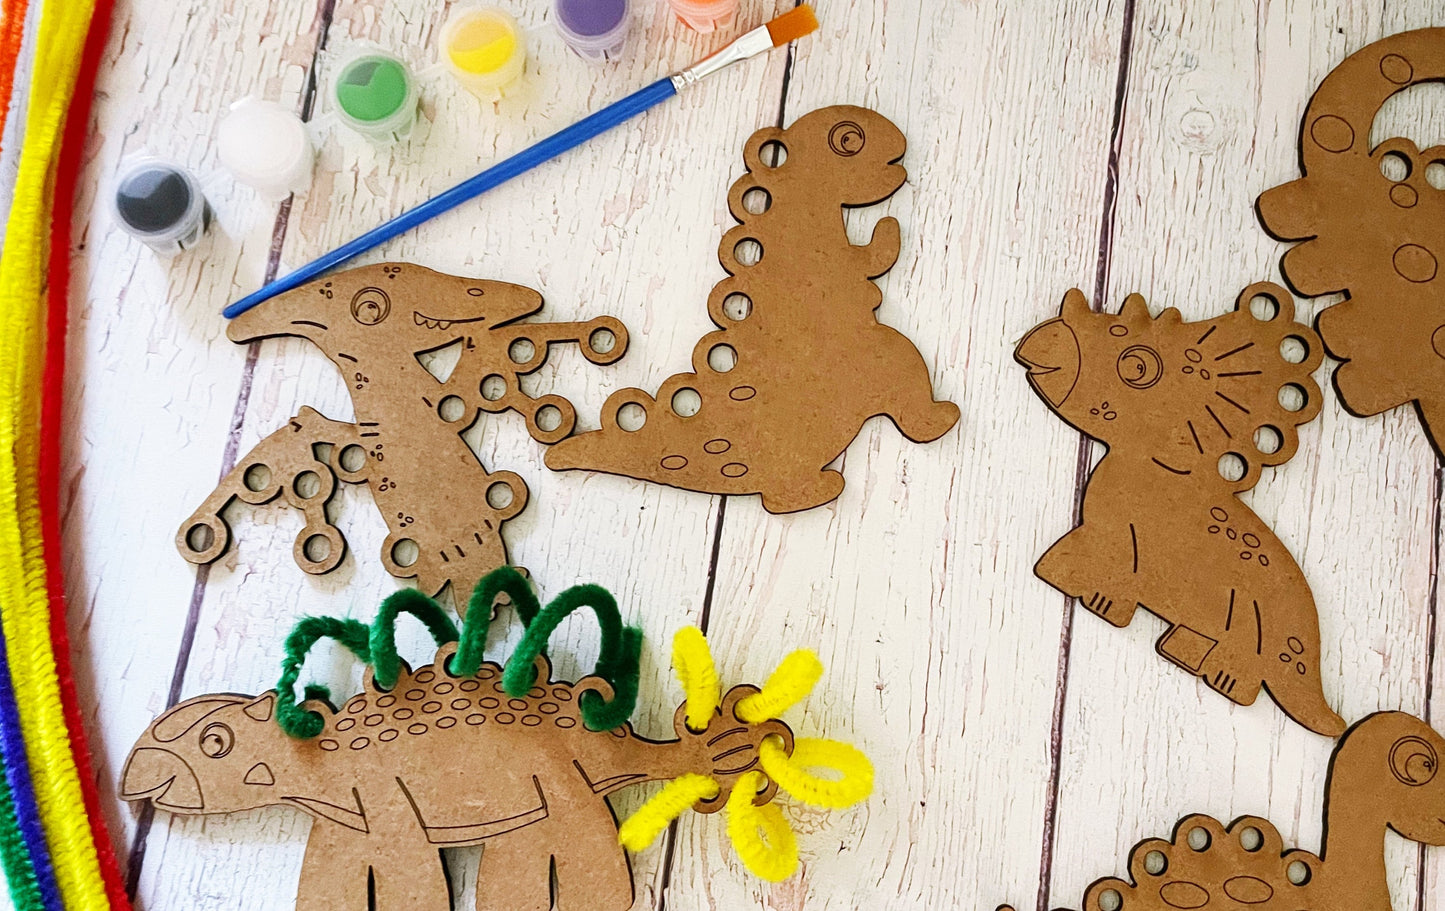 Craft Kits for Kids, Christmas Crafts, Toddler Craft Kits, DIY Toddler Craft Kit, Dinosaur Crafts for Kids, Pretend Play Dinosaurs